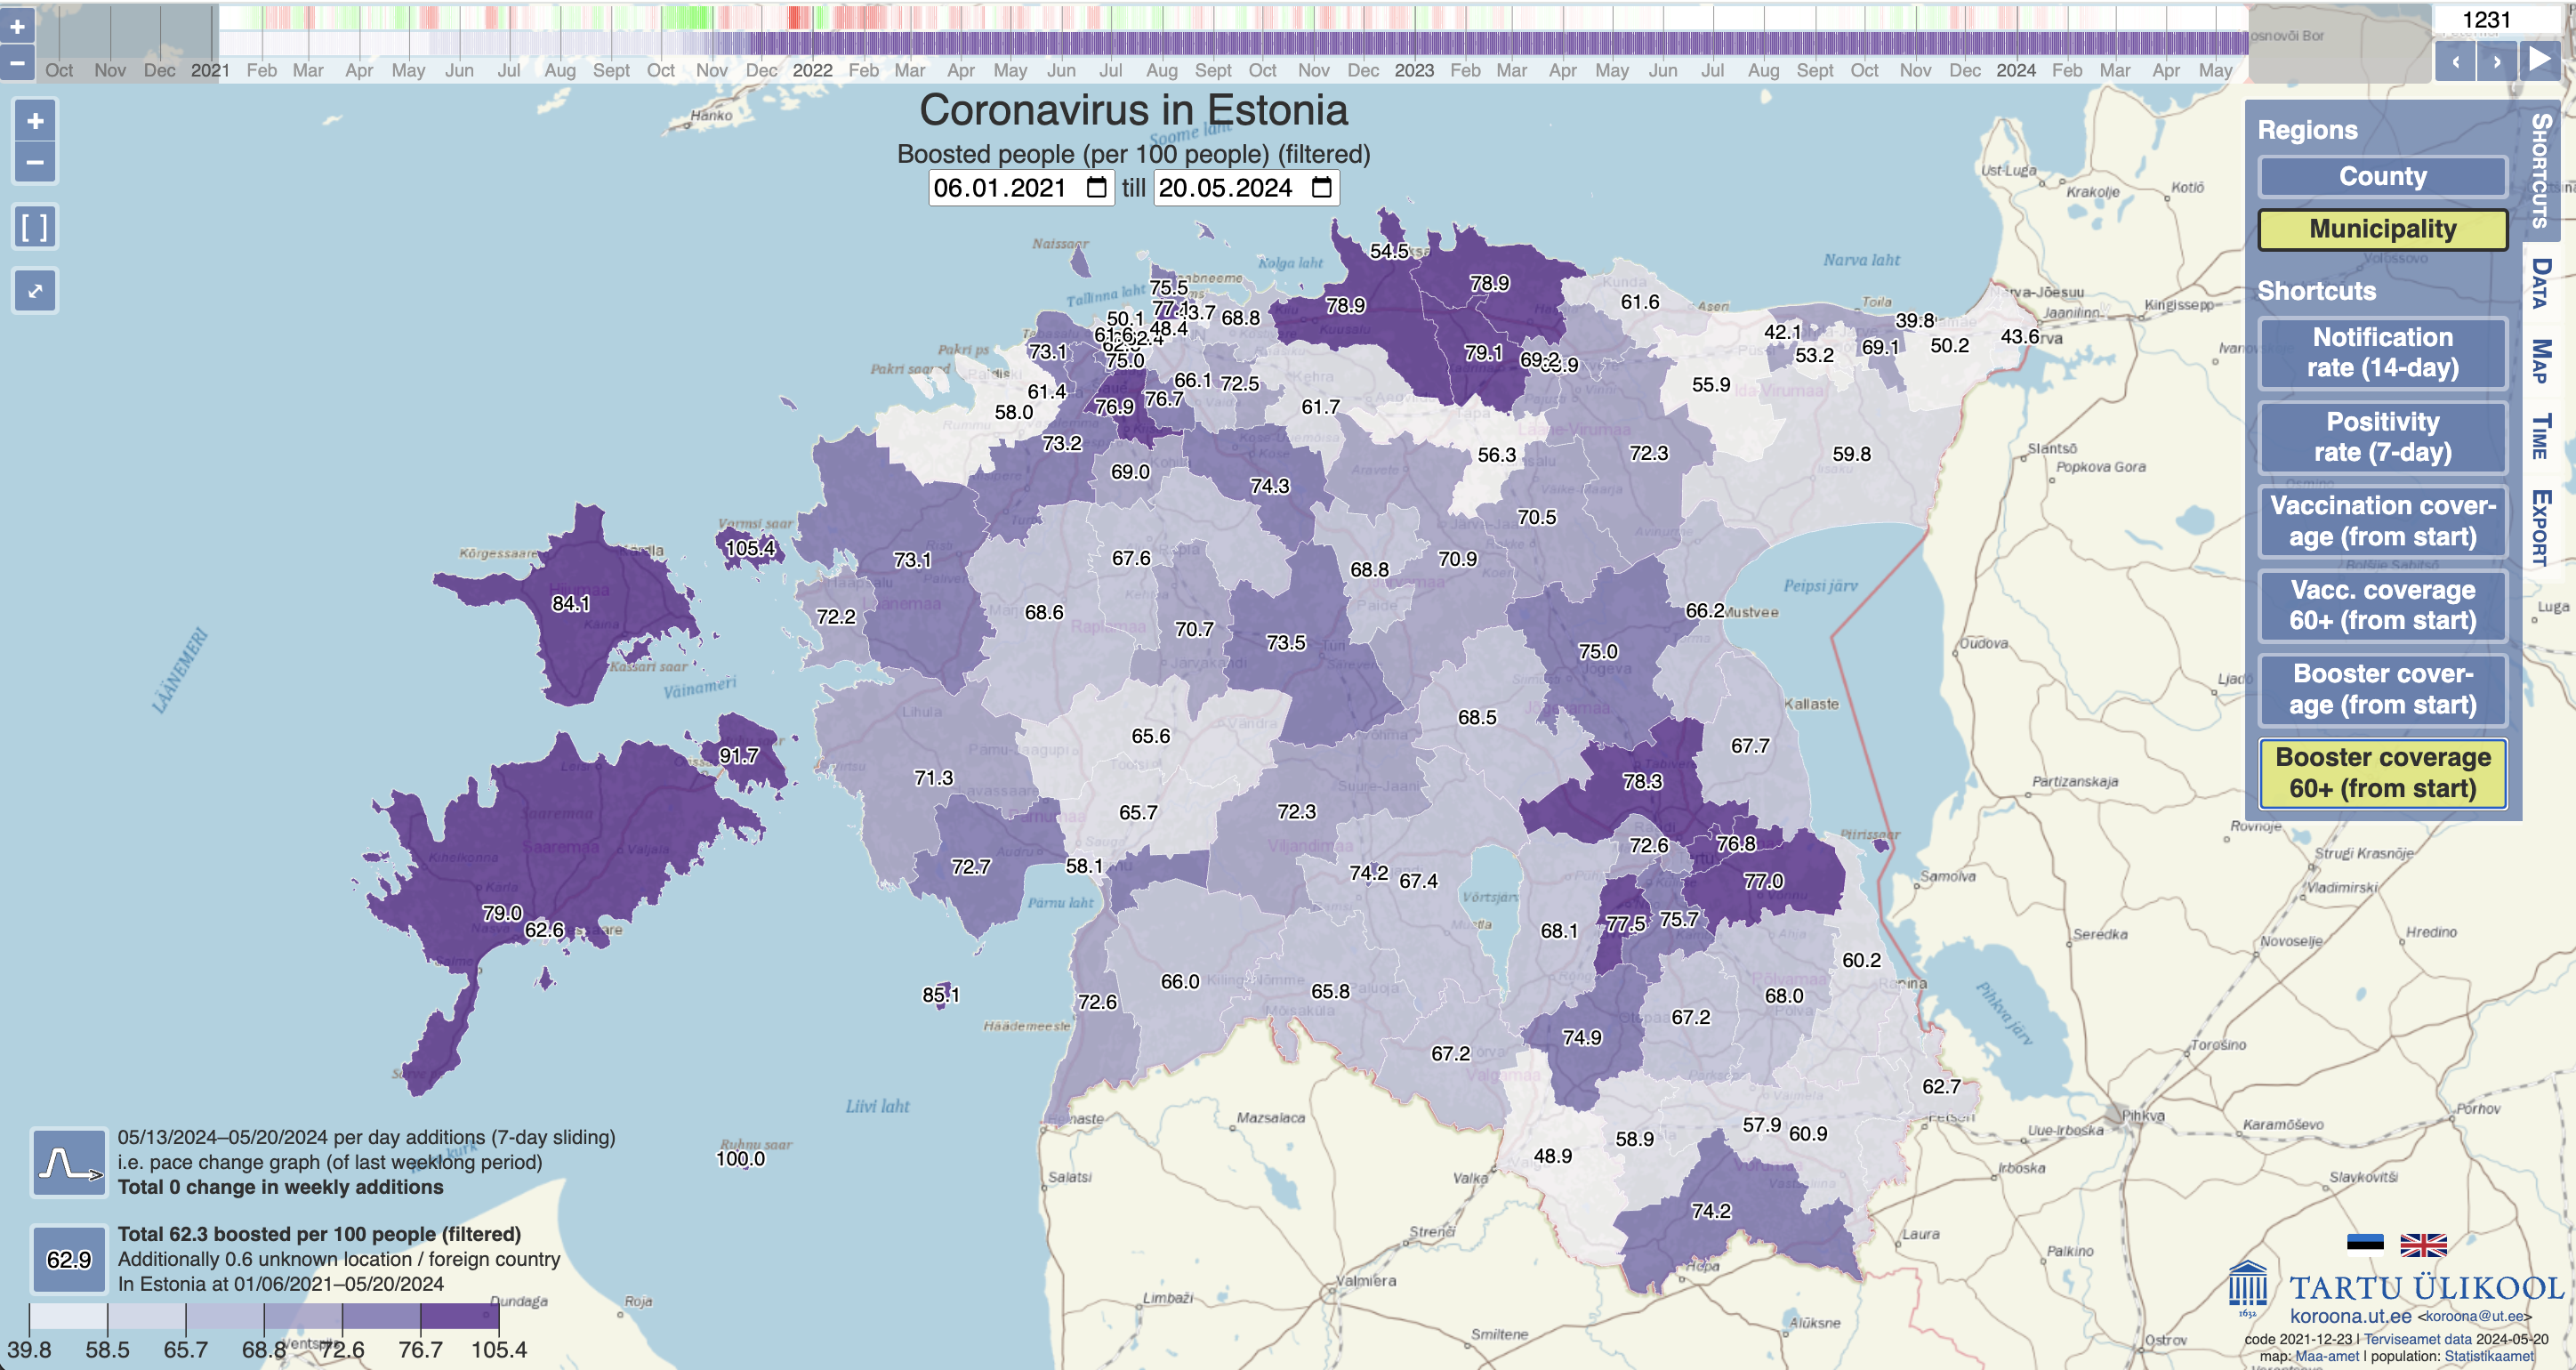 Choropleth map from the University of Tartu showing booster vaccination rates among the elderly in different regions of Estonia. The map has buttons that can be used to change the grographic scale from county to municipality.